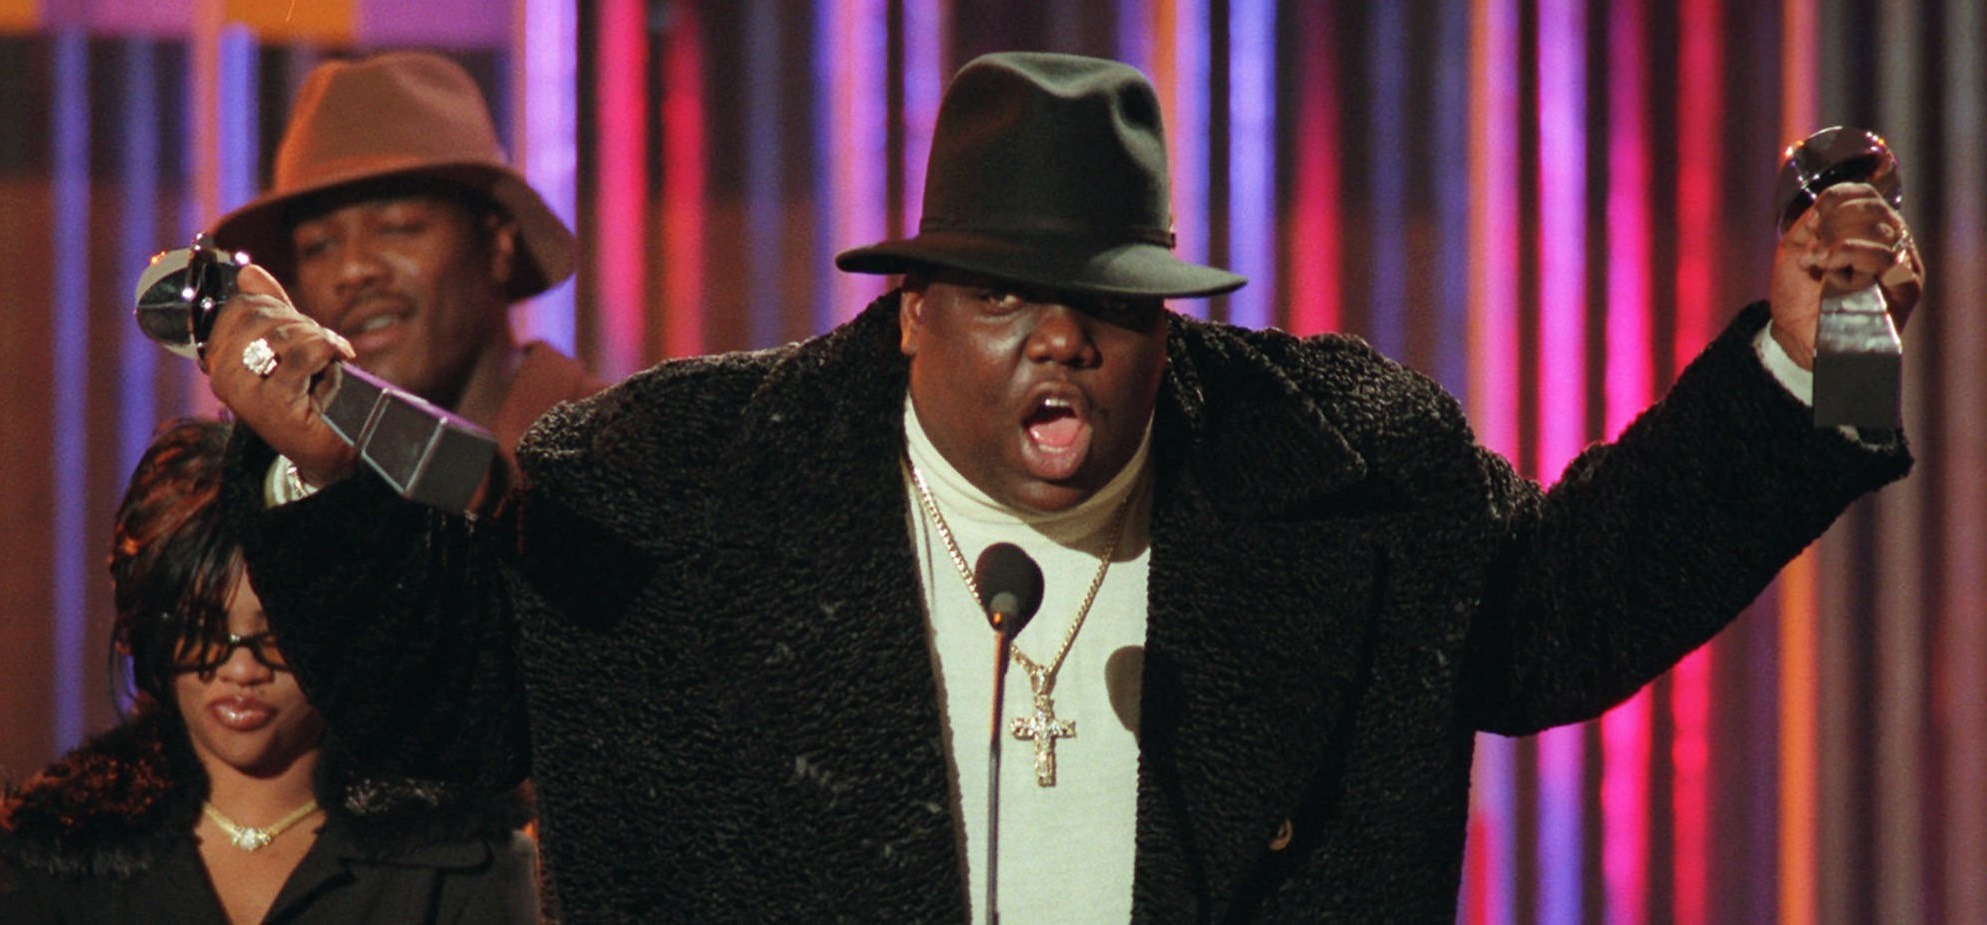 On this day in 1971, Christopher Wallace, aka Notorious B.I.G., was born in Brooklyn